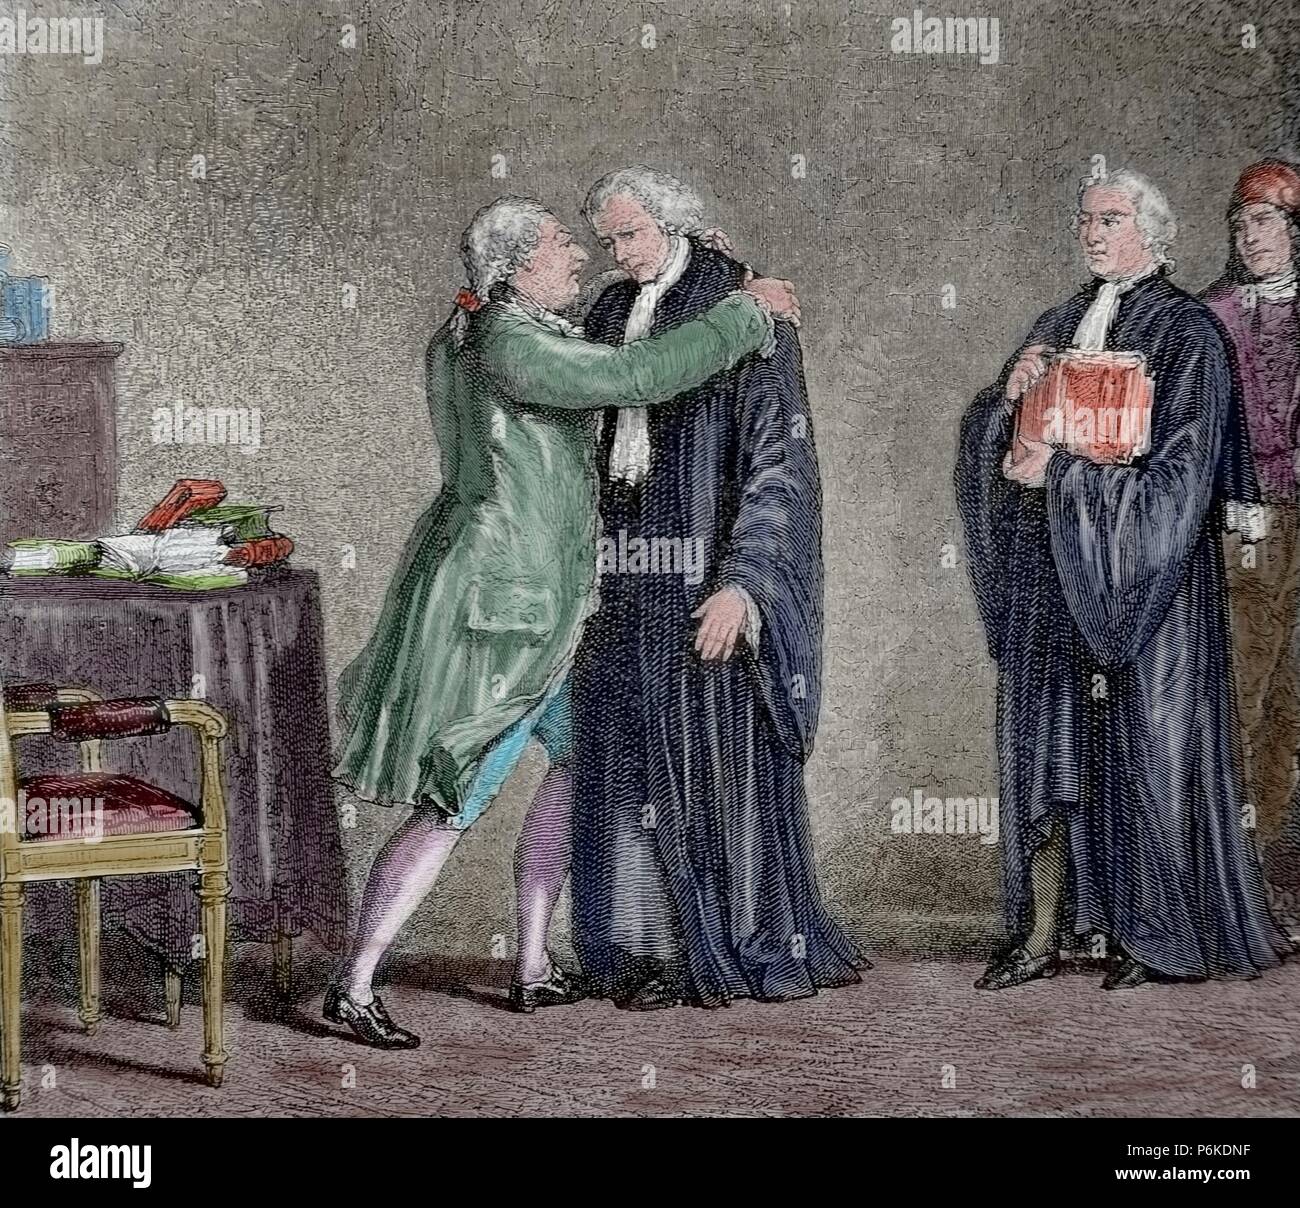 Meeting between Louis XVI (1754-1793) and the Minister Lamoignon-Malesherbes (1721-1794), afterwards counsel for the defence of Louis XVI. Engraving by Blanpain. 19th century. Colored. Stock Photo